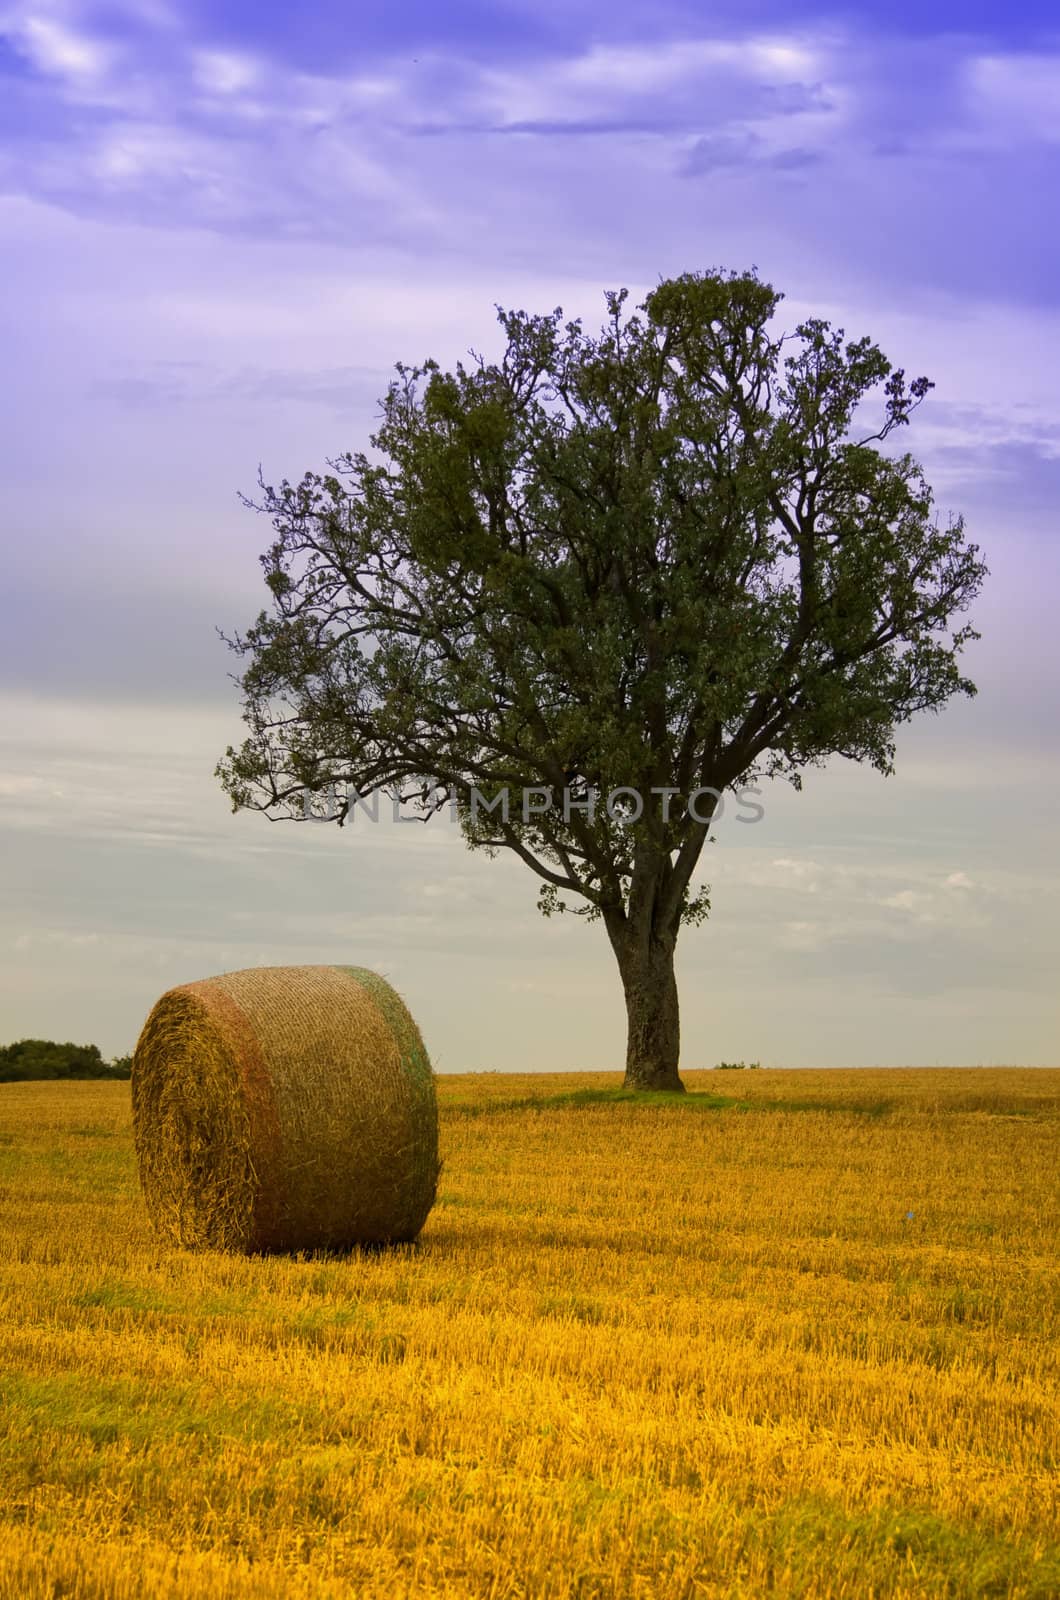 straw ball and a green tree in a field